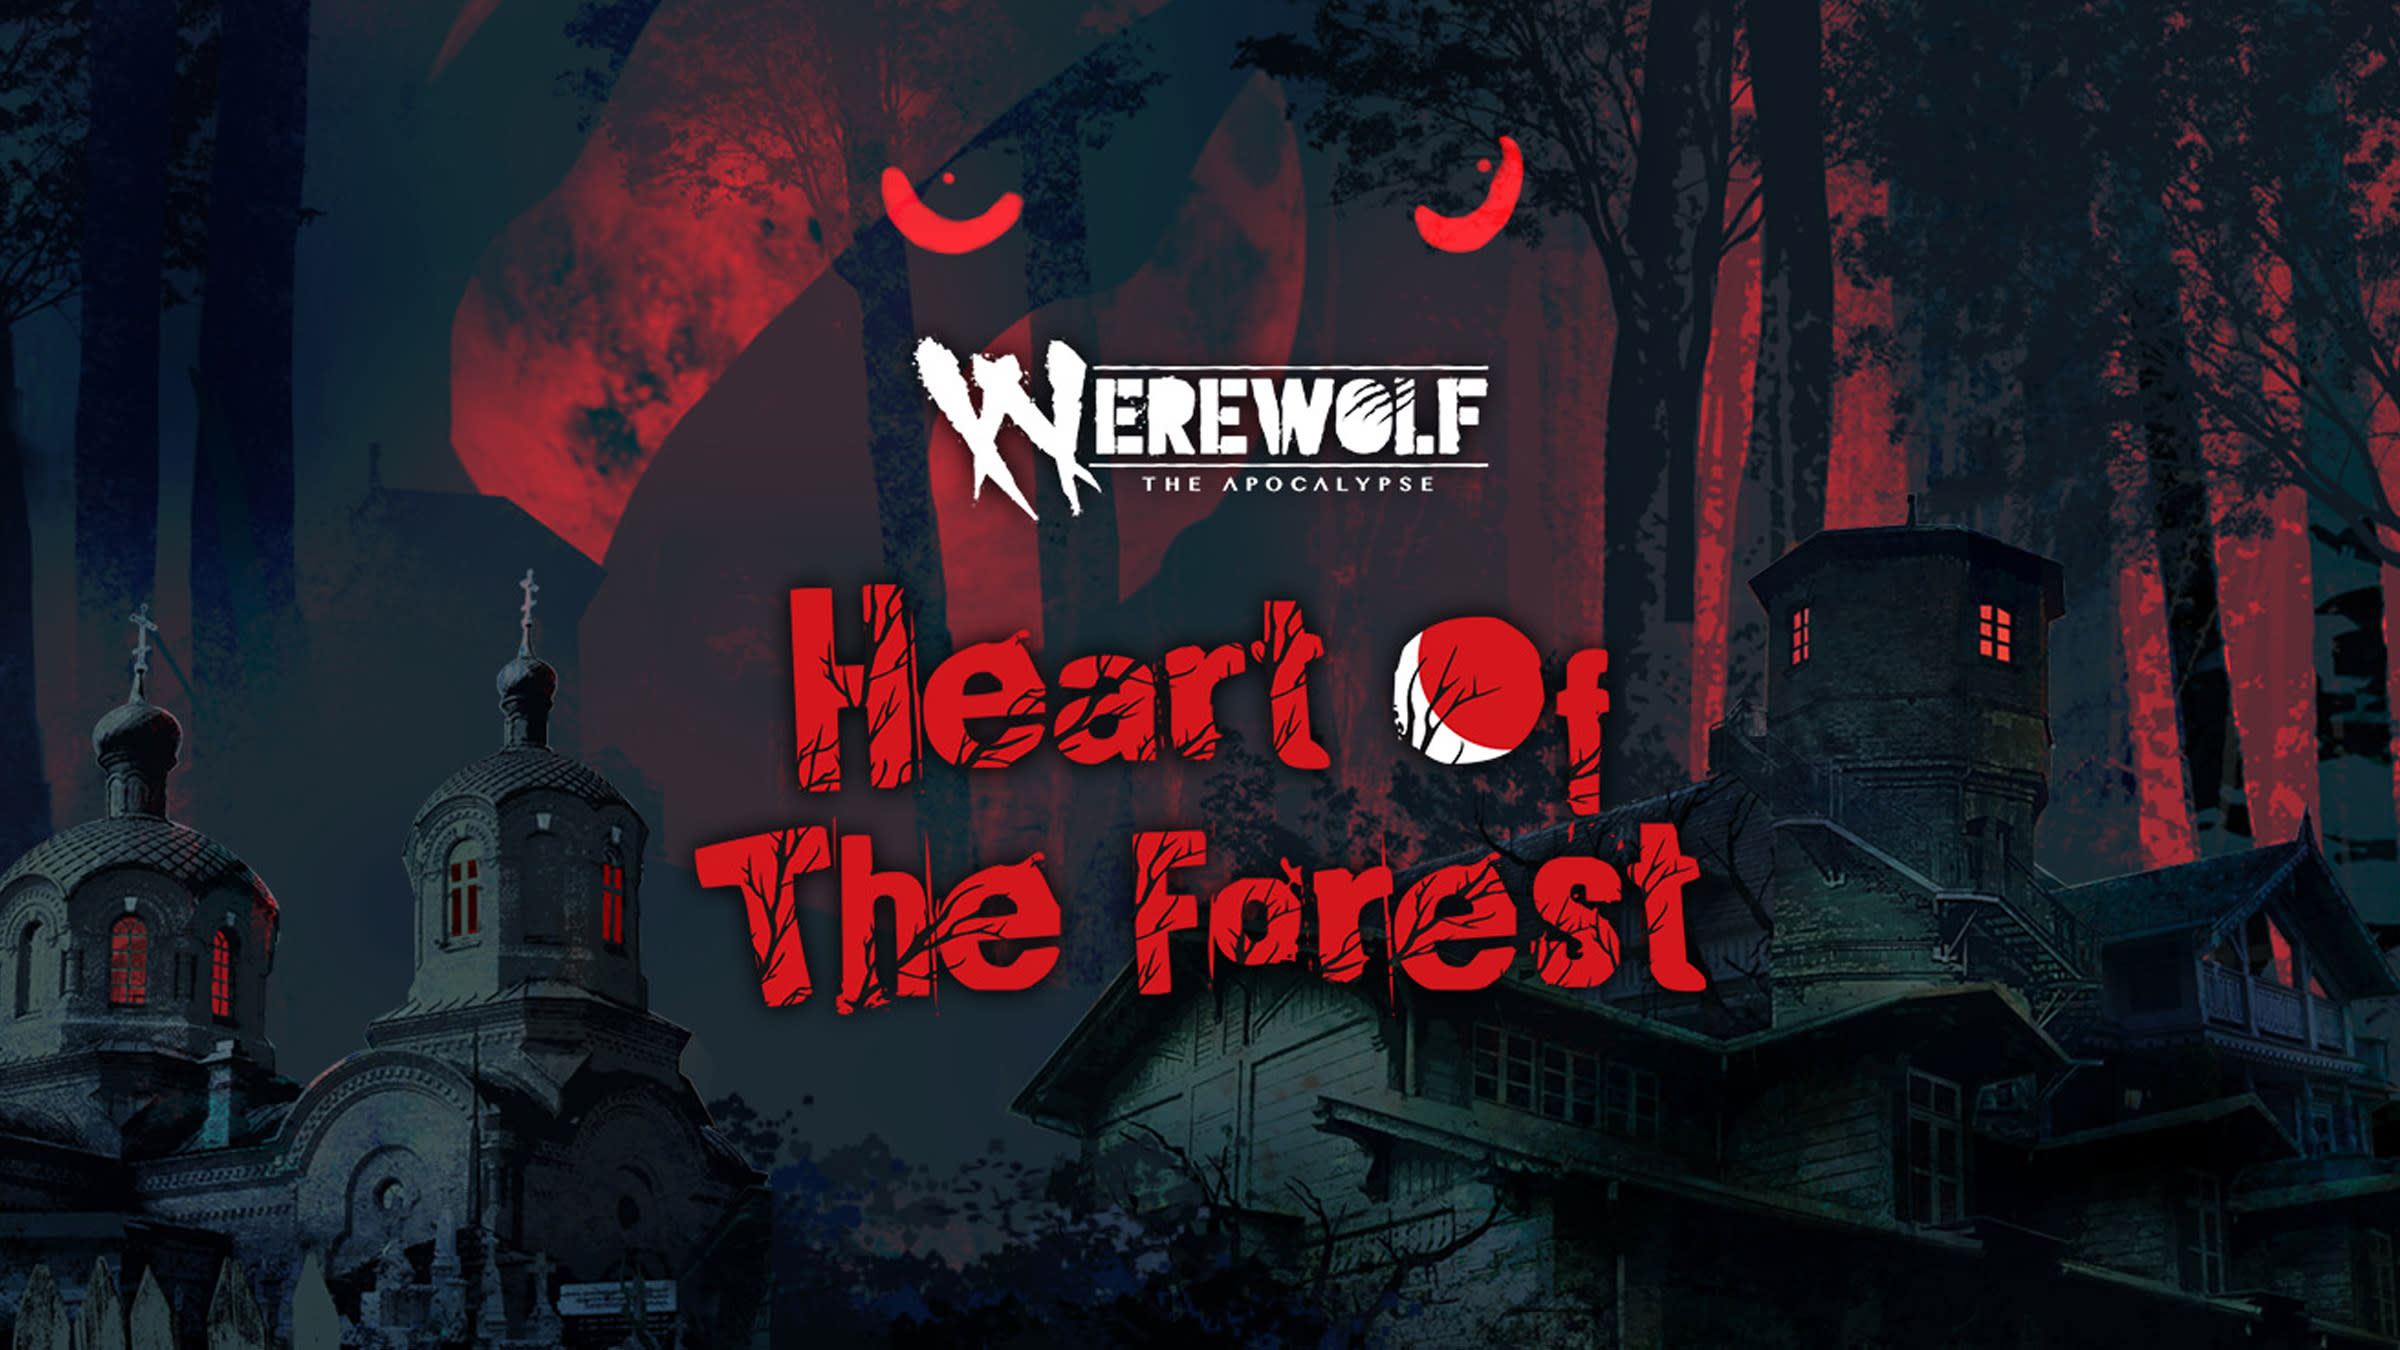 WTA Heart of The Forest